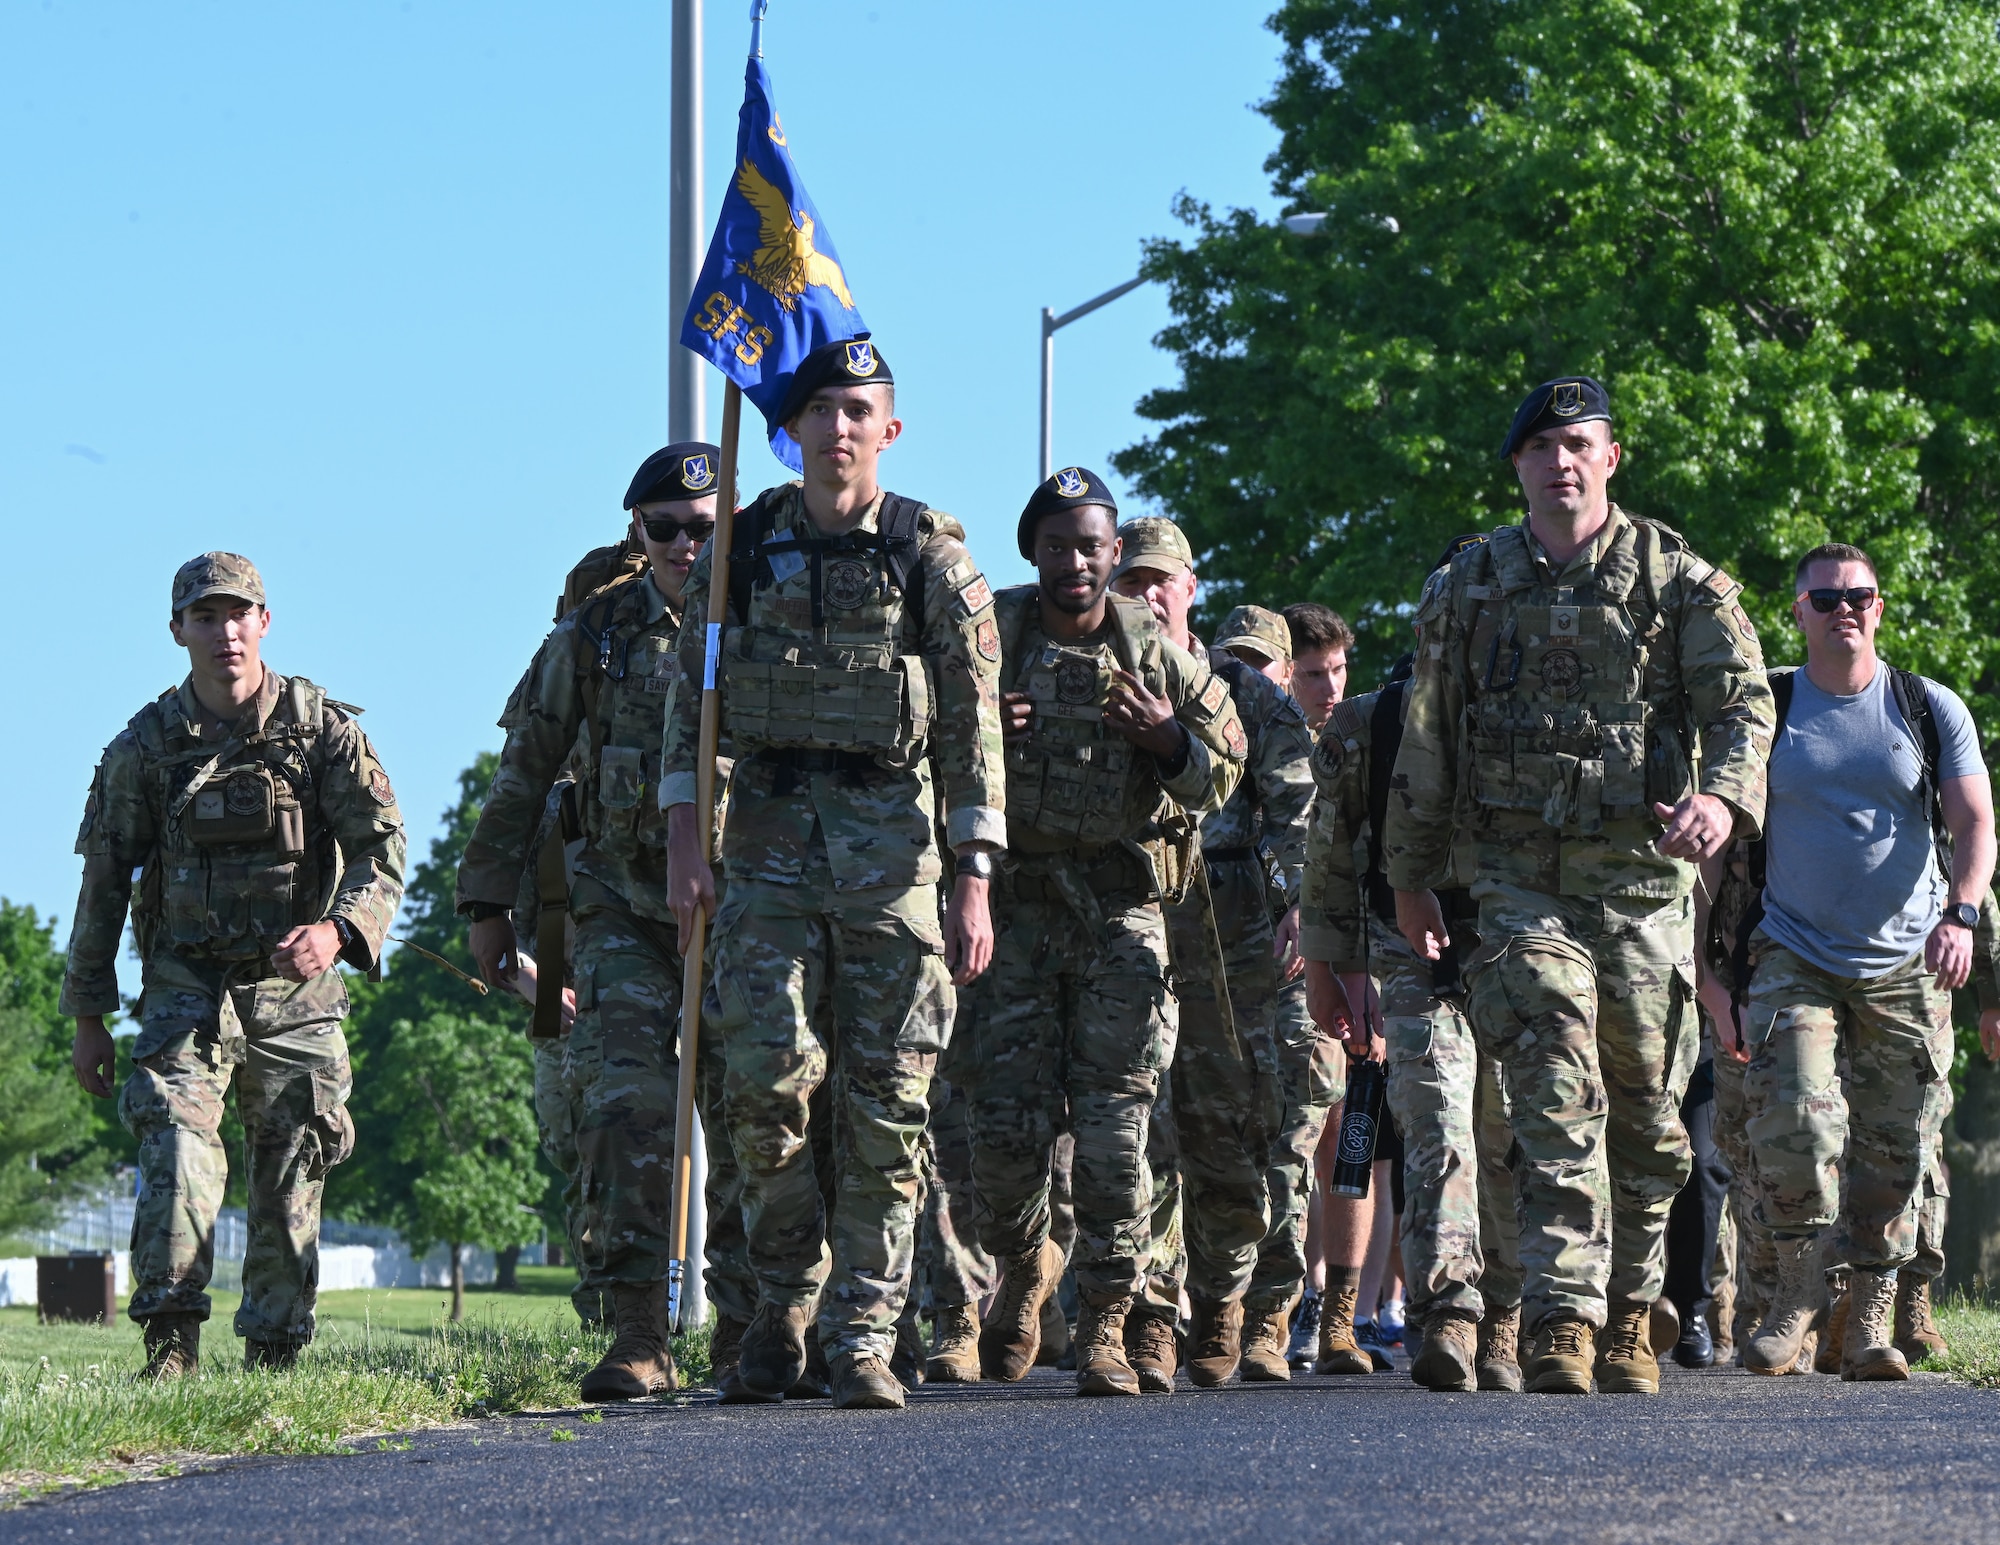 Members of the 509th Bomb Wing ruck during the annual police week memorial ruck march on Whiteman Air Force Base, Mo., May 16, 2022. Participants rucked four miles stopping at eight different stations to honor fallen defenders, doing various exercises at each station. (U.S. Air Force photo by Airman 1st Class Bryson Britt)